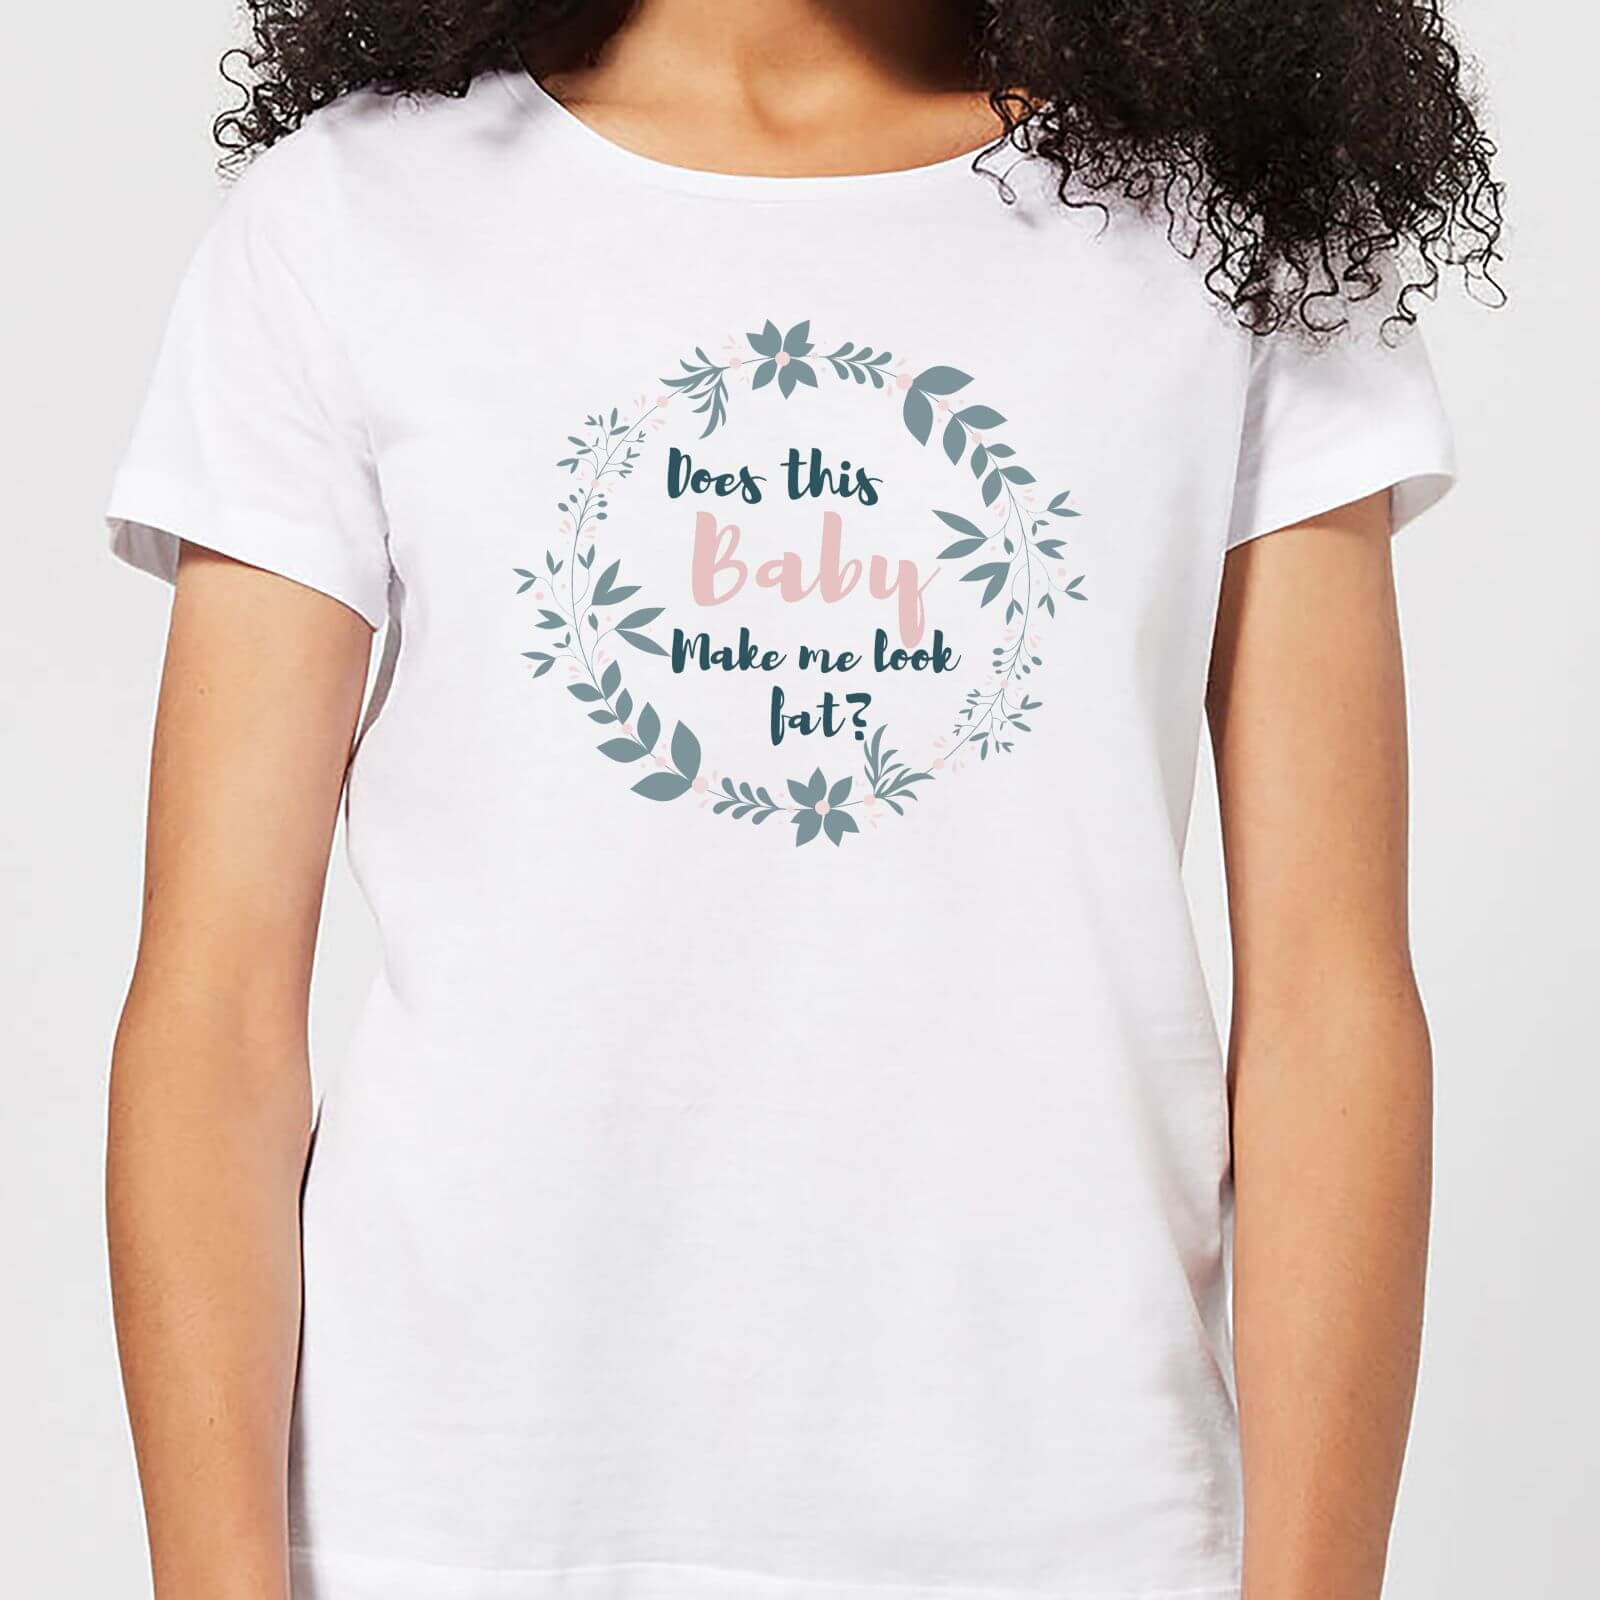 Be My Pretty Does This Baby Women's T-Shirt - White - 4XL - White